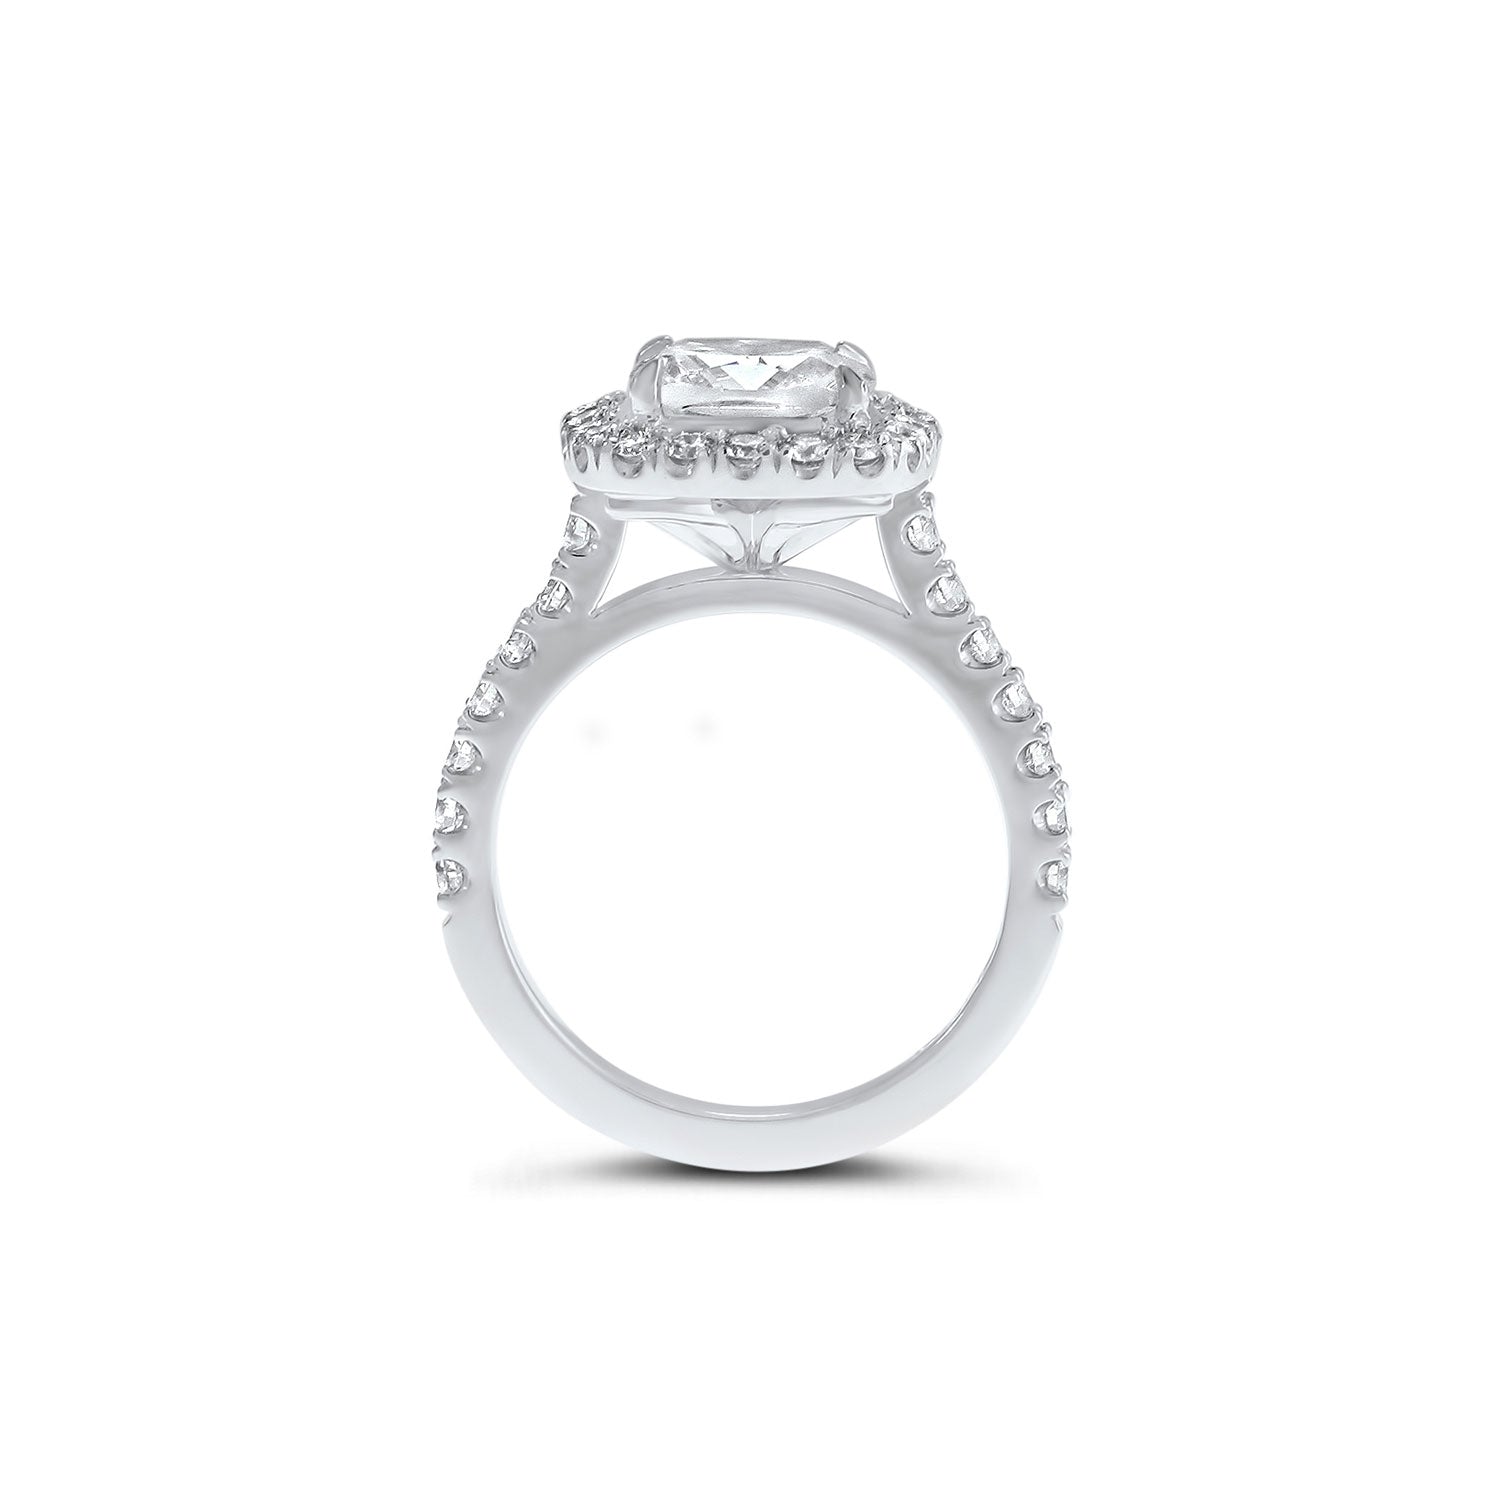 Cushion Cut Solitaire Diamond Halo Engagement Ring